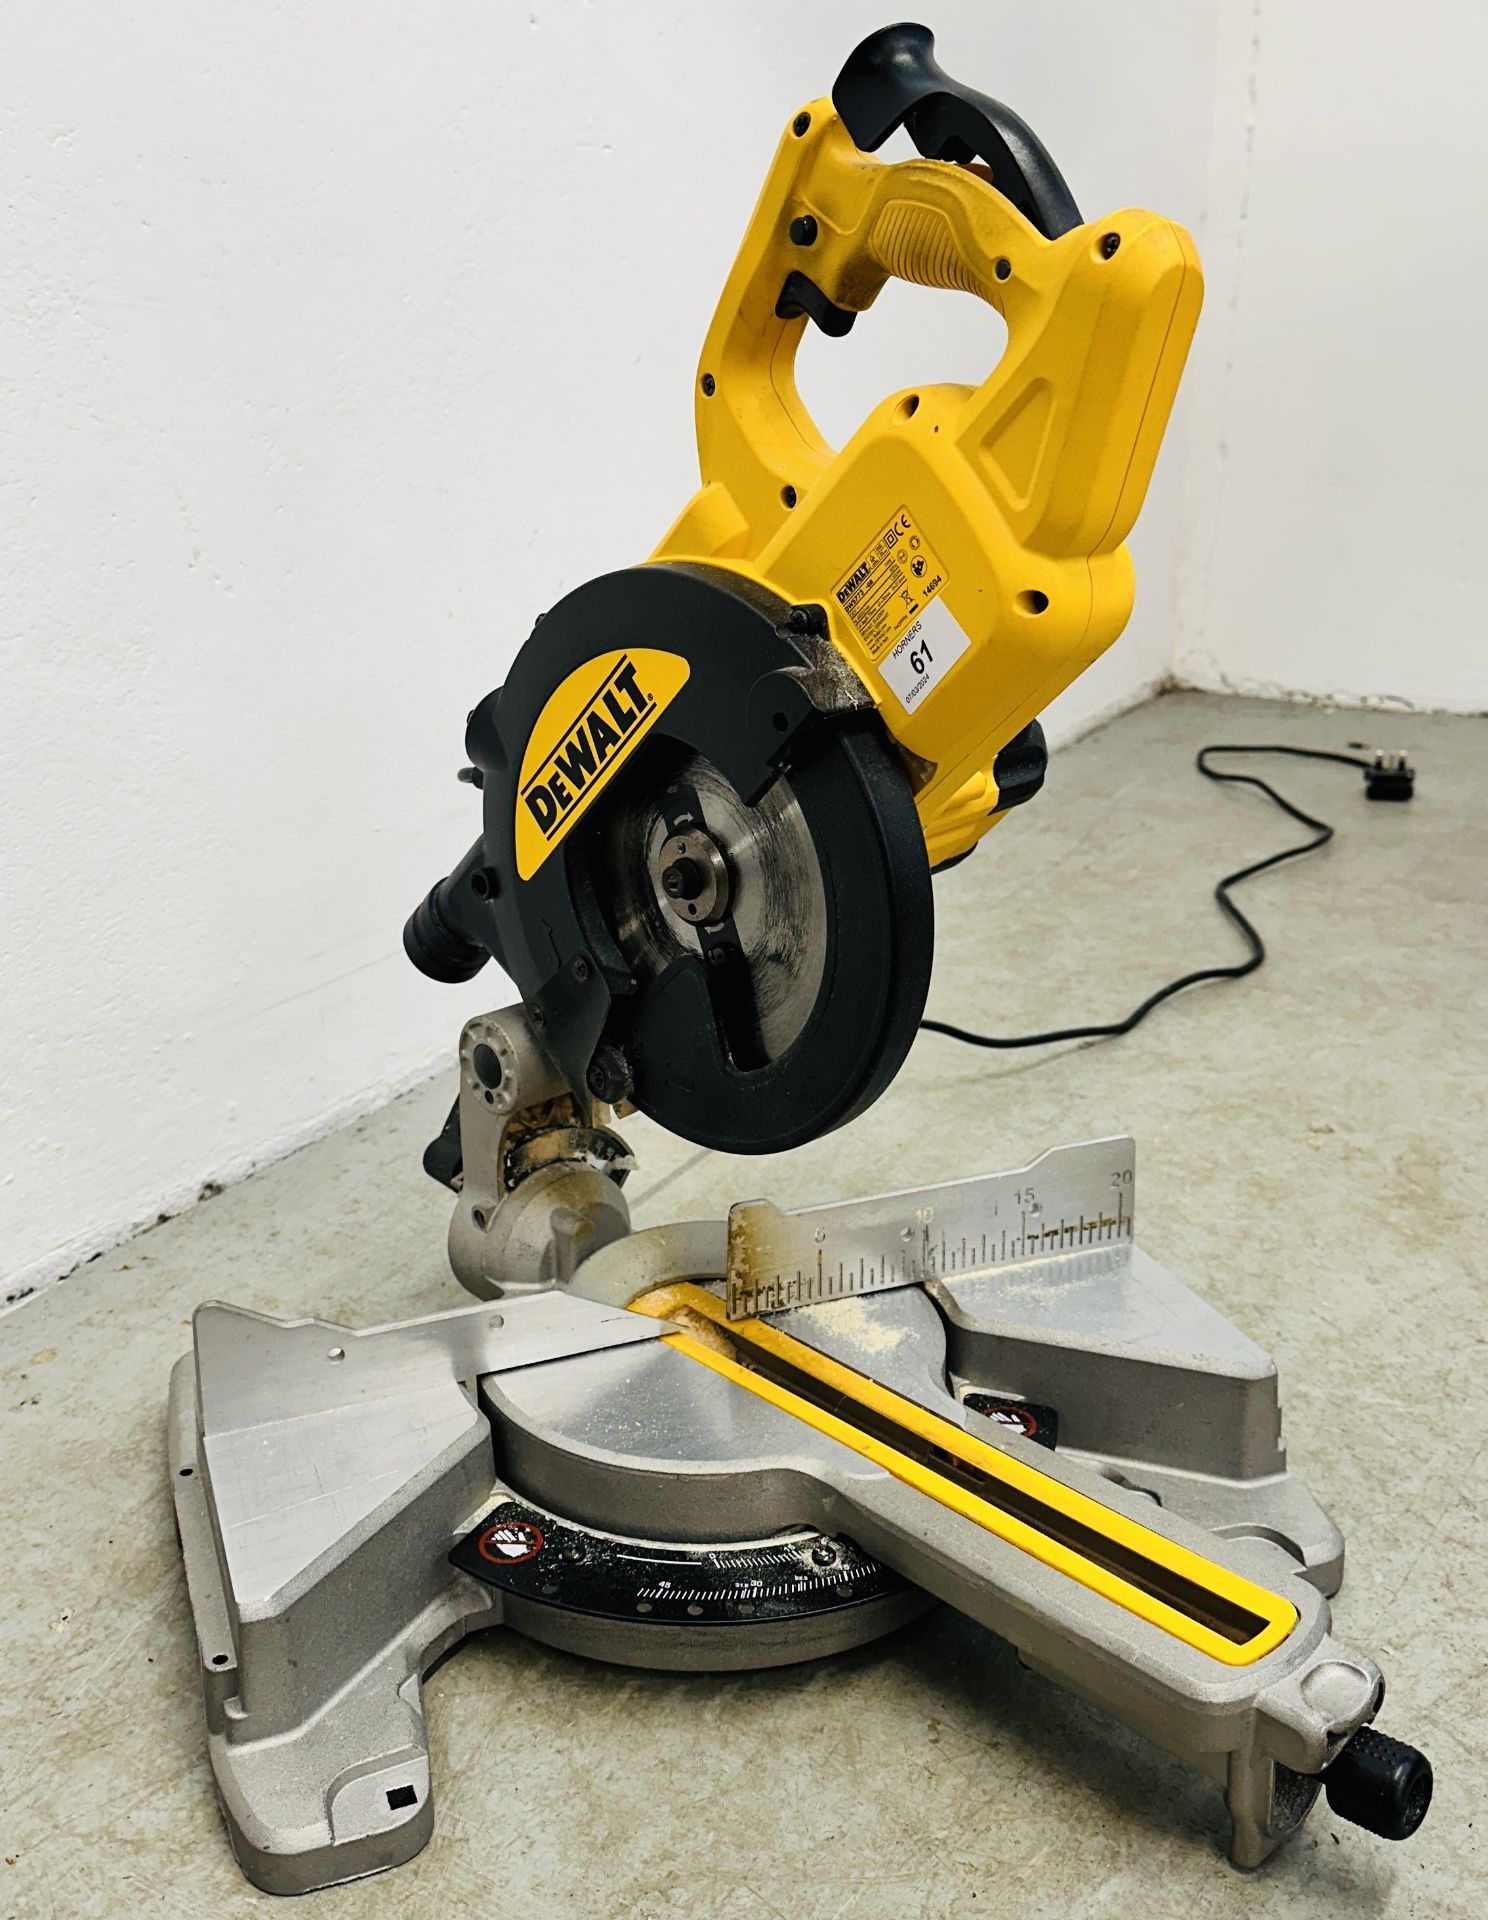 DE WALT COMPOUND MITRE SAW MODEL DWS773 - SOLD AS SEEN. THIS LOT IS SUBJECT TO VAT ON HAMMER PRICE.